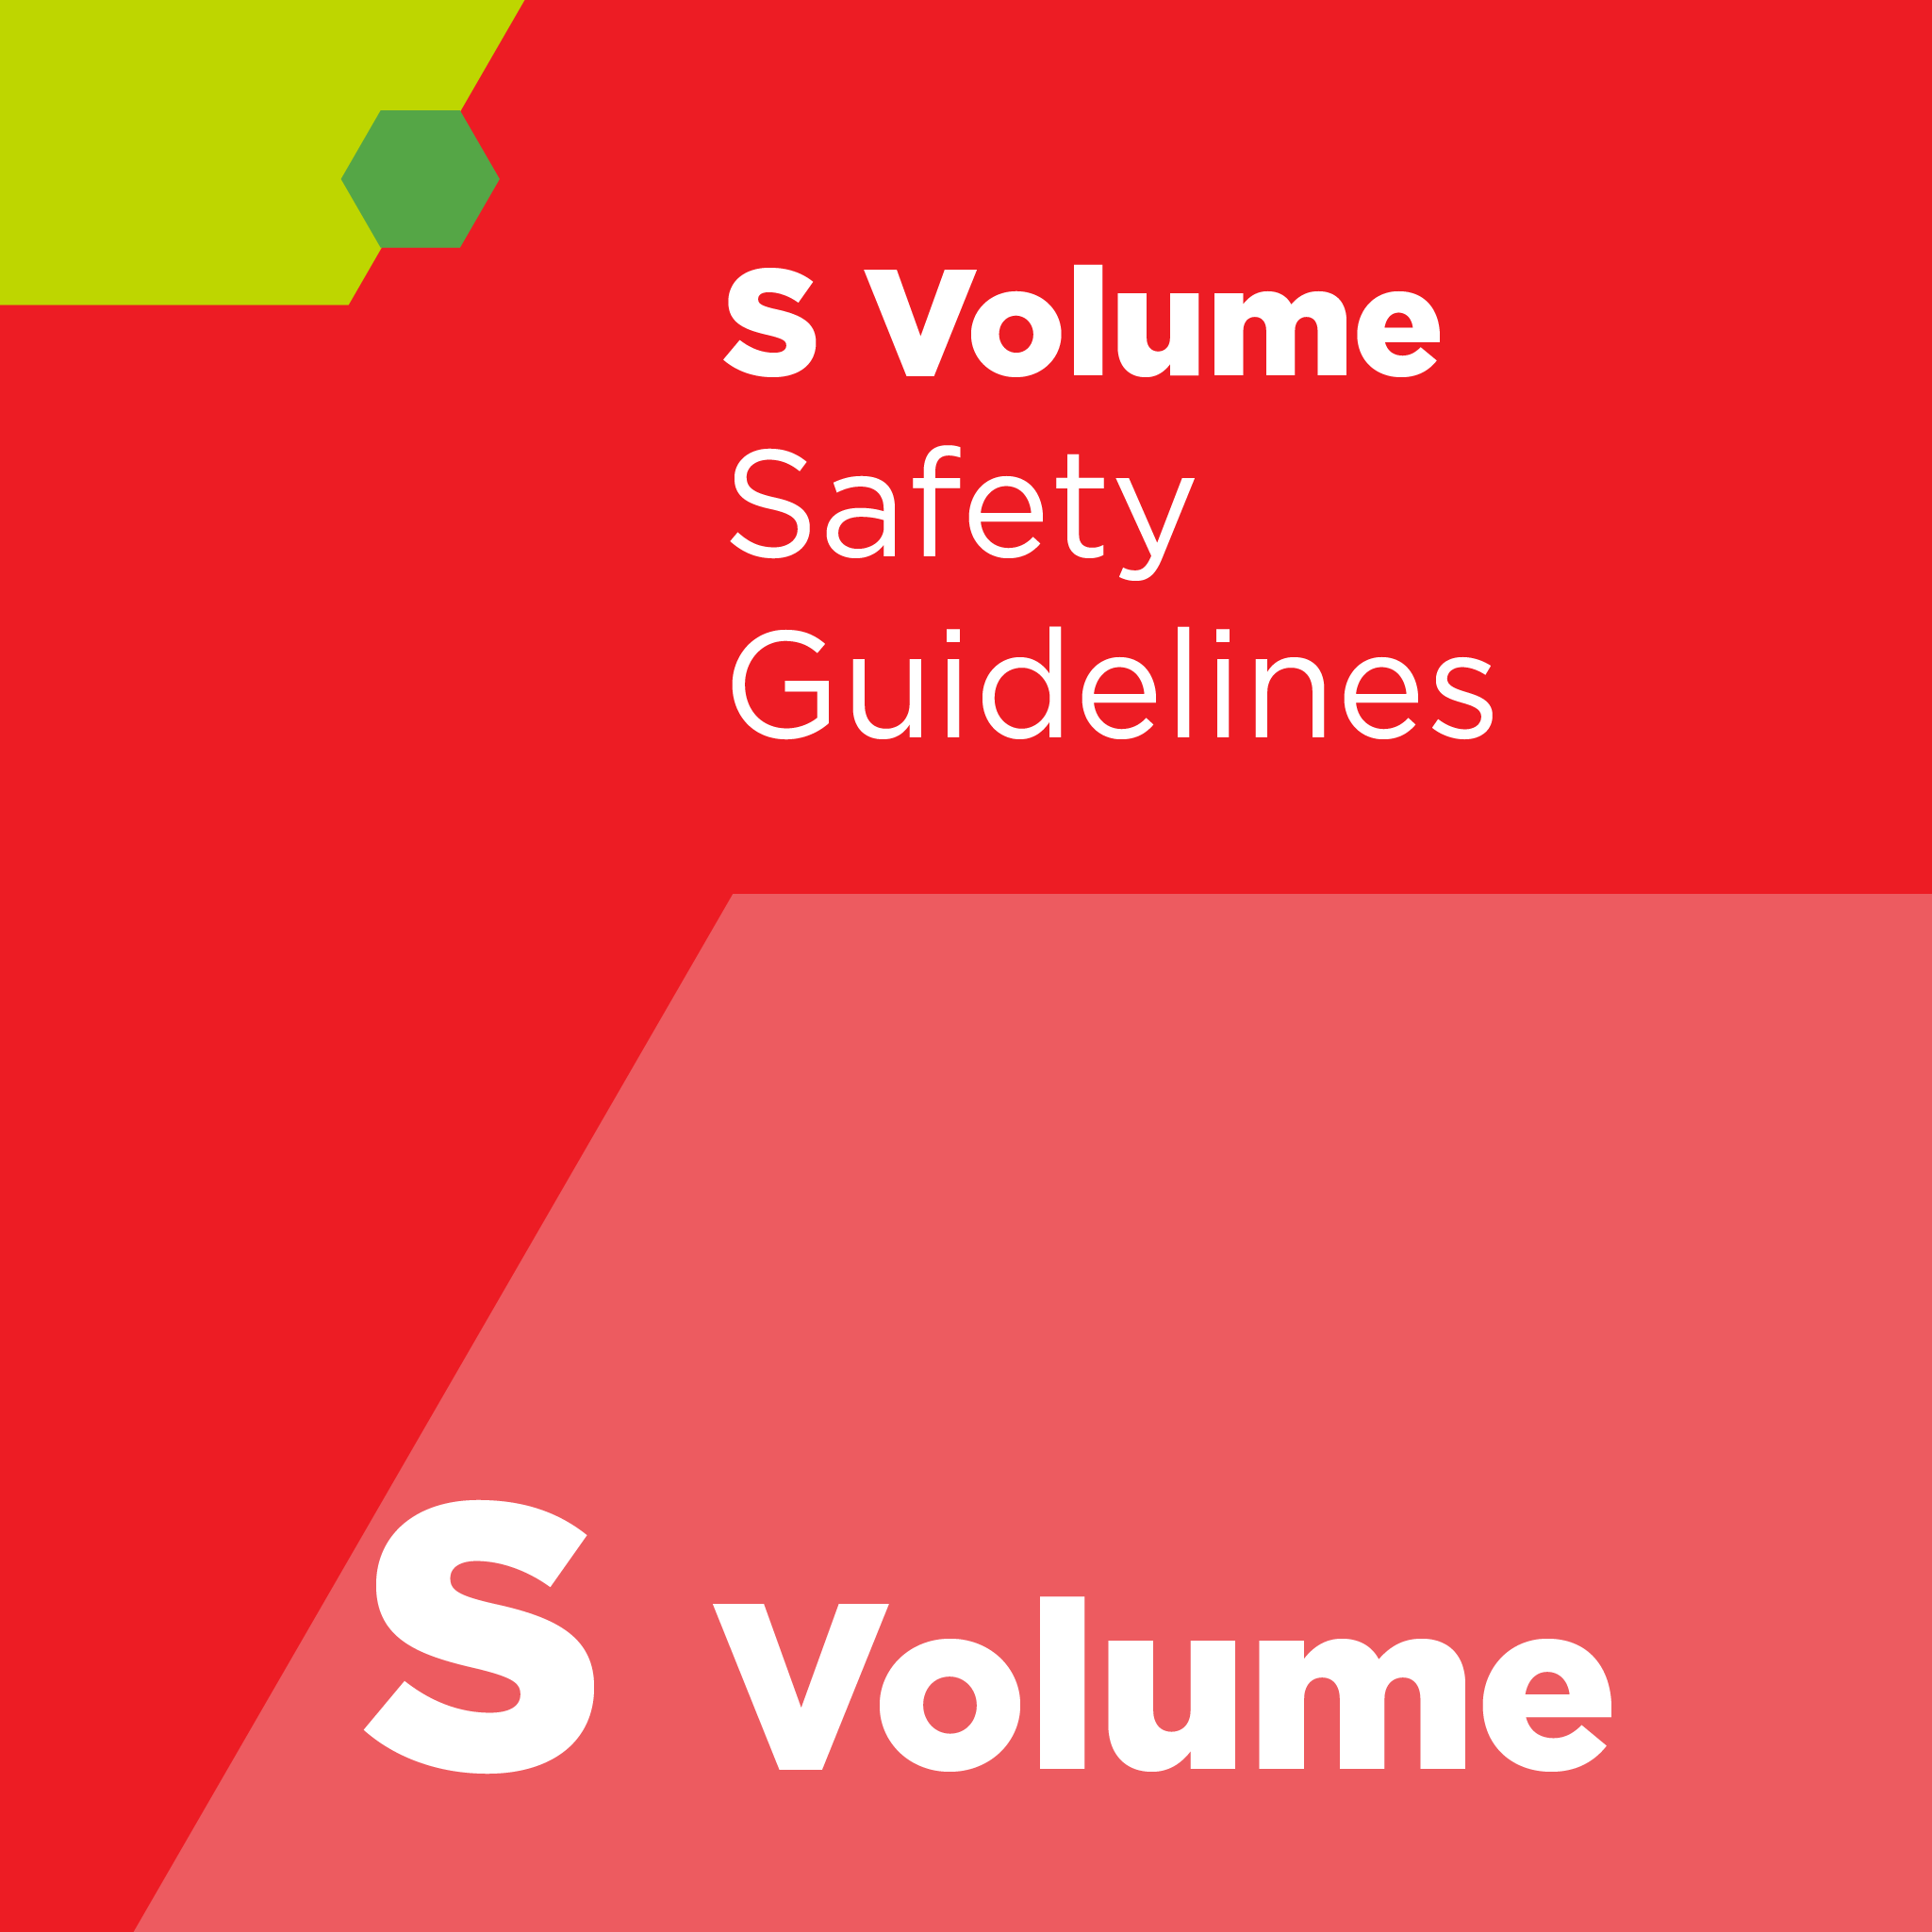 S01700 - SEMI S17 - Safety Guideline for Unmanned Transport Vehicle (UTV) Systems